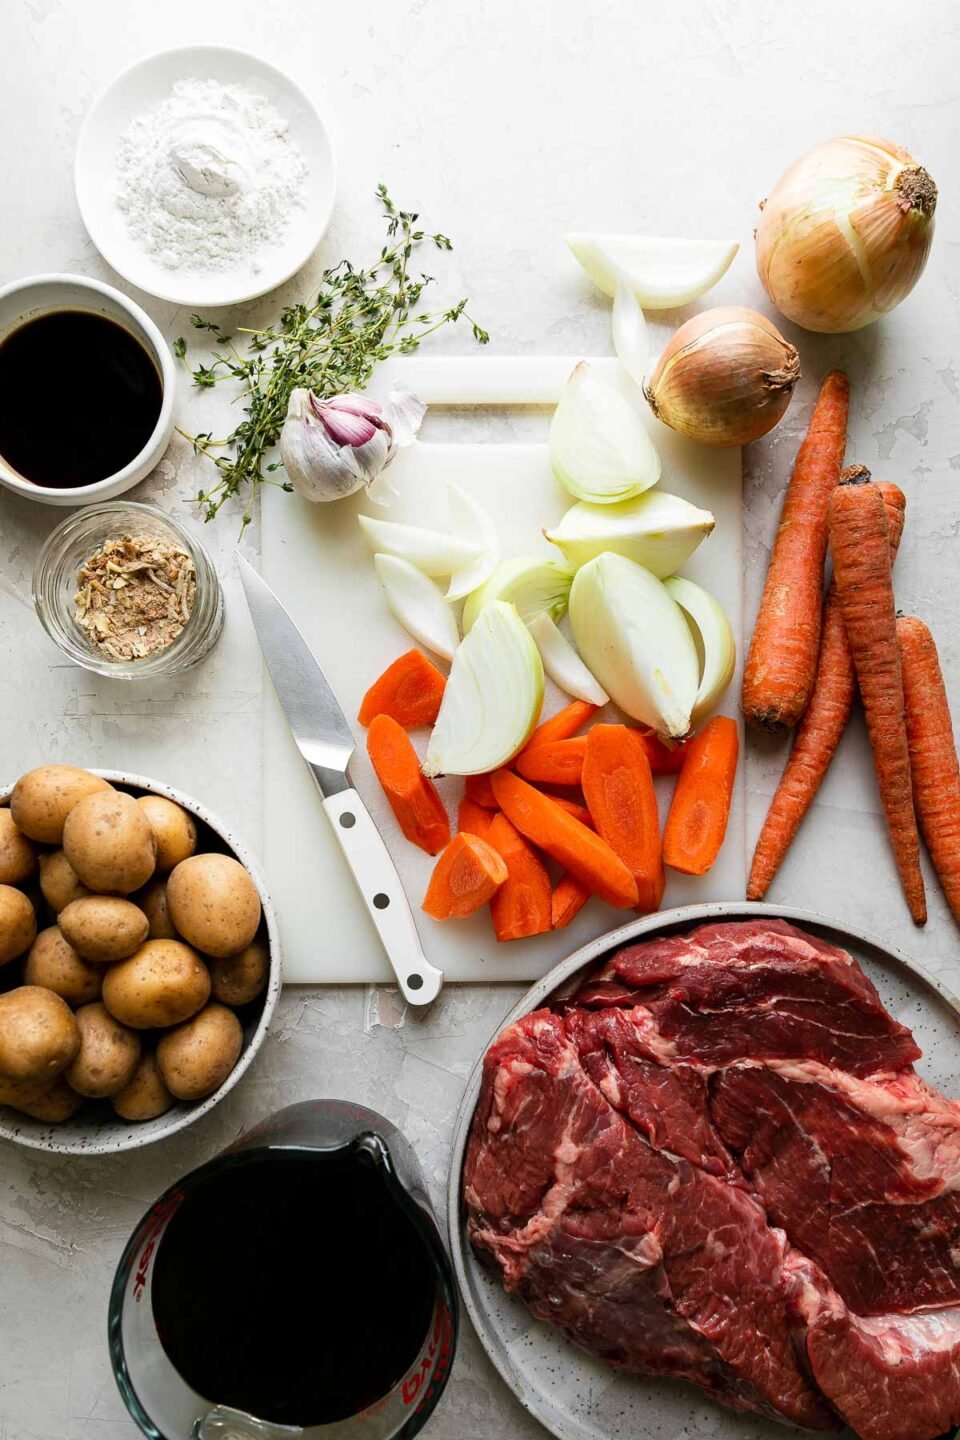 Mom's Extra-Veggies Pot Roast with vegetables ingredients arranged on na creamy white textured surface: boneless beef chuck roast, all-purpose flour, olive oil, baby gold potatoes, carrots, yellow onions, garlic, beef stock, Worcestershire sauce, and dry onion soup mix.